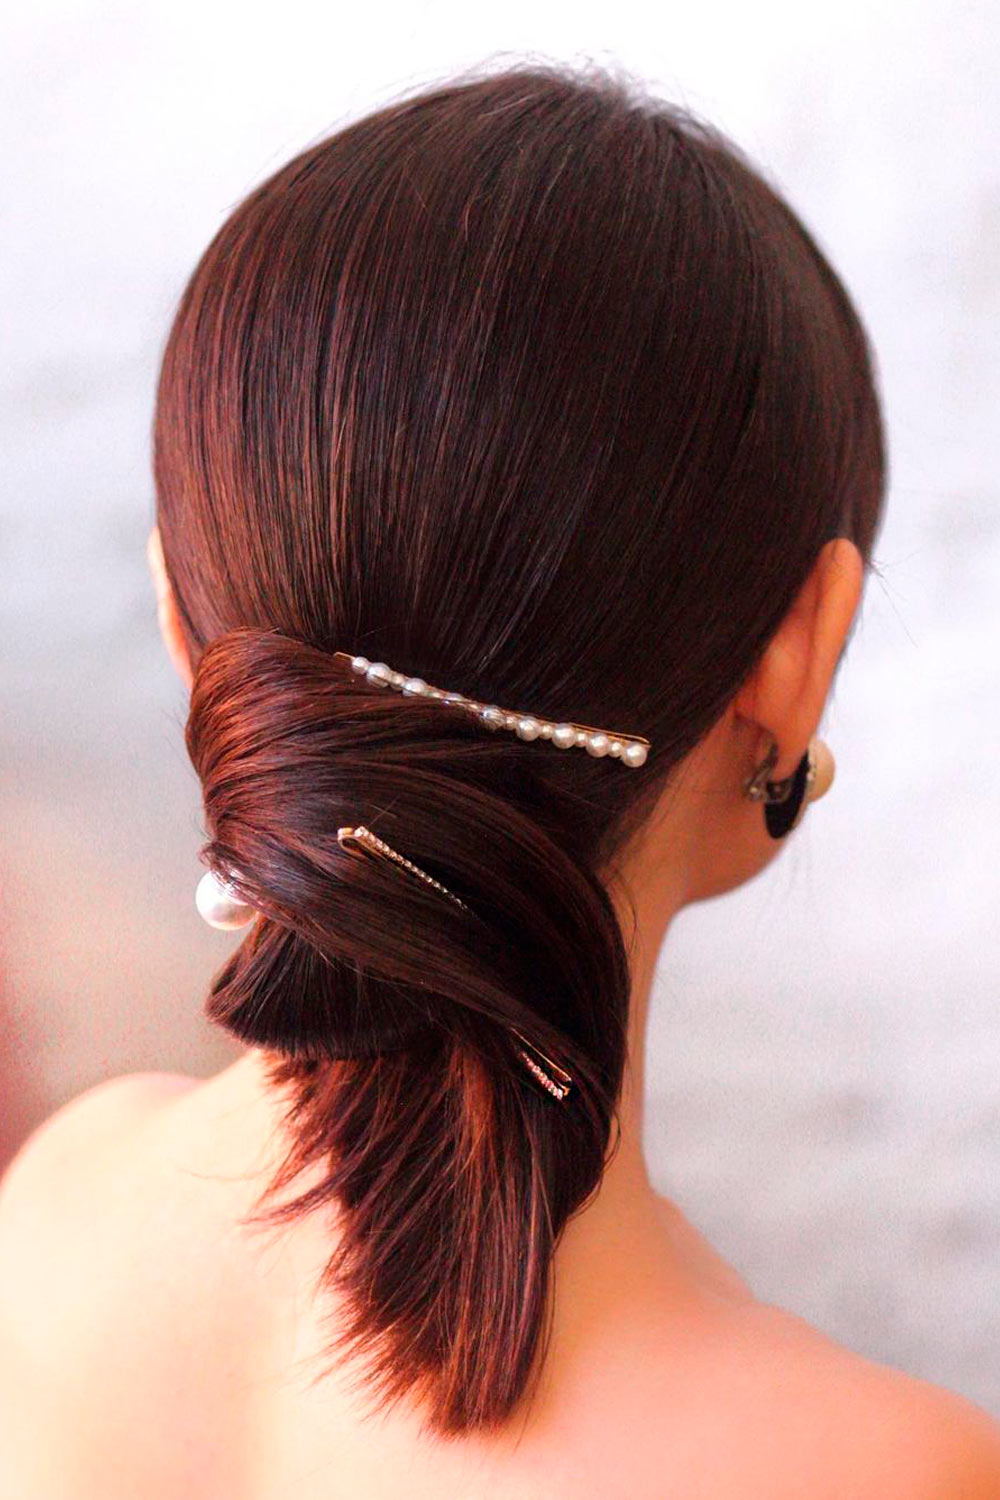 French and other twists are a wonderful way to style your hair for Christmas